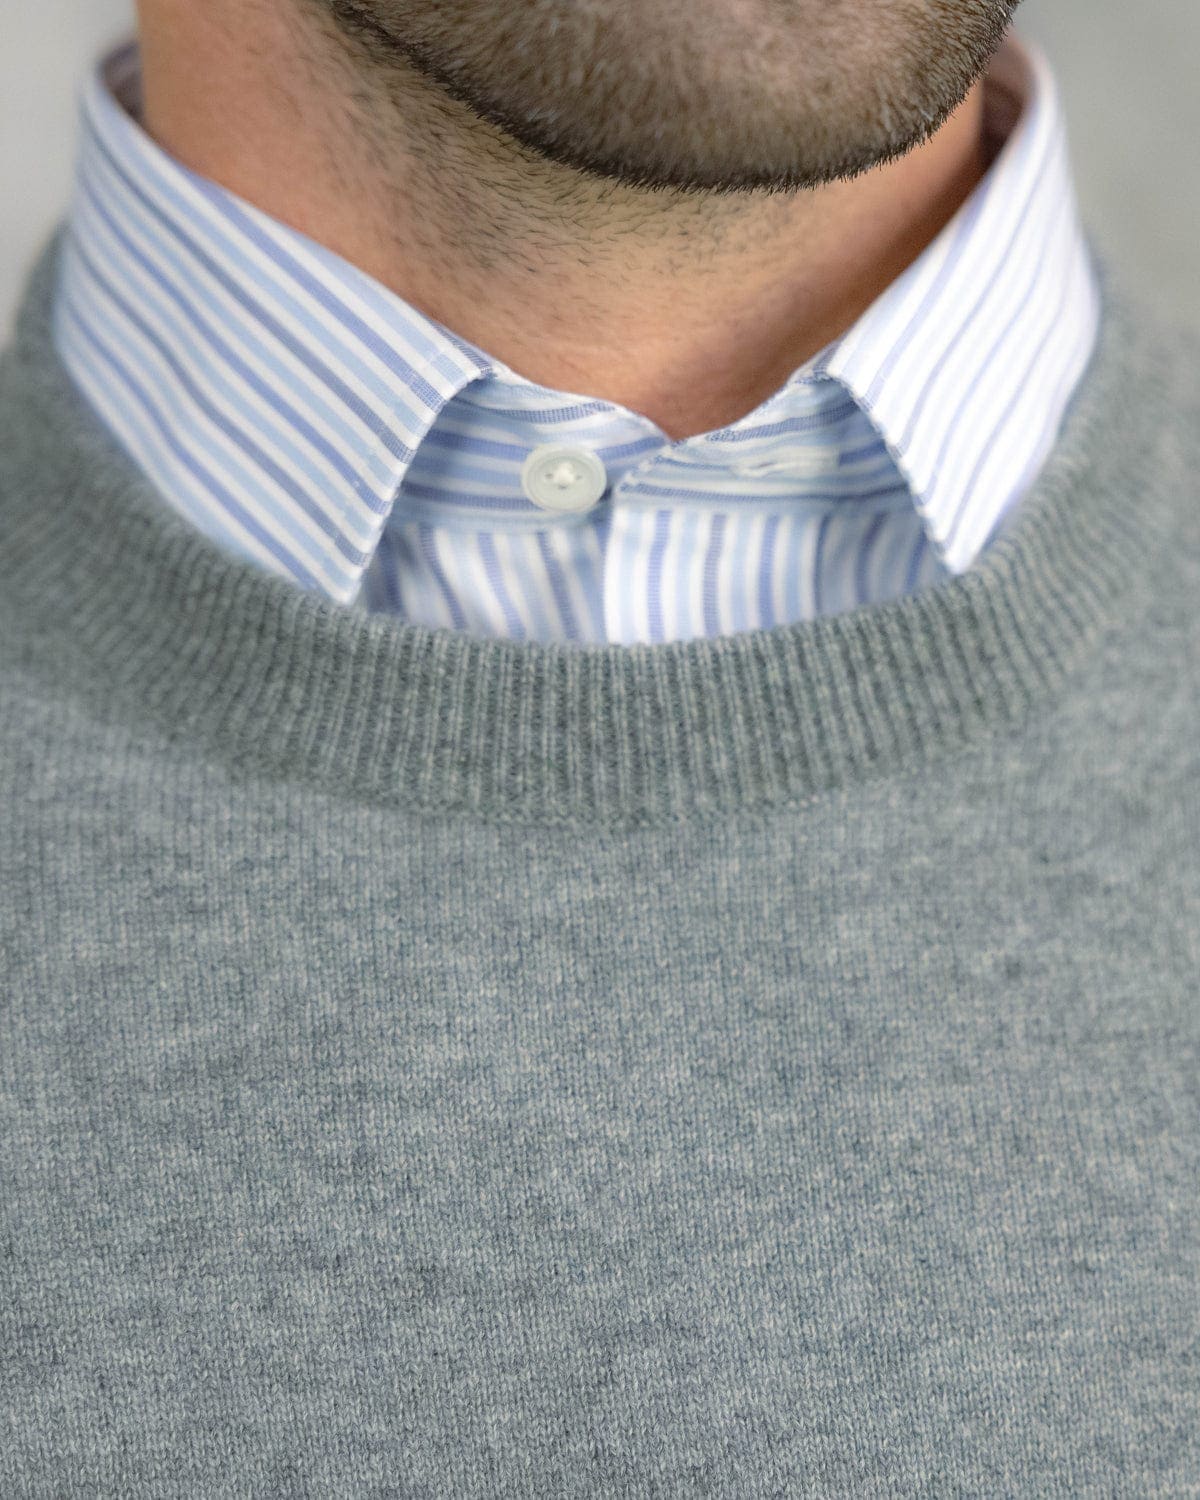 Contemporary Fit, Classic Collar, Double Cuff Shirt In White With Navy & Blue Ladder Stripe